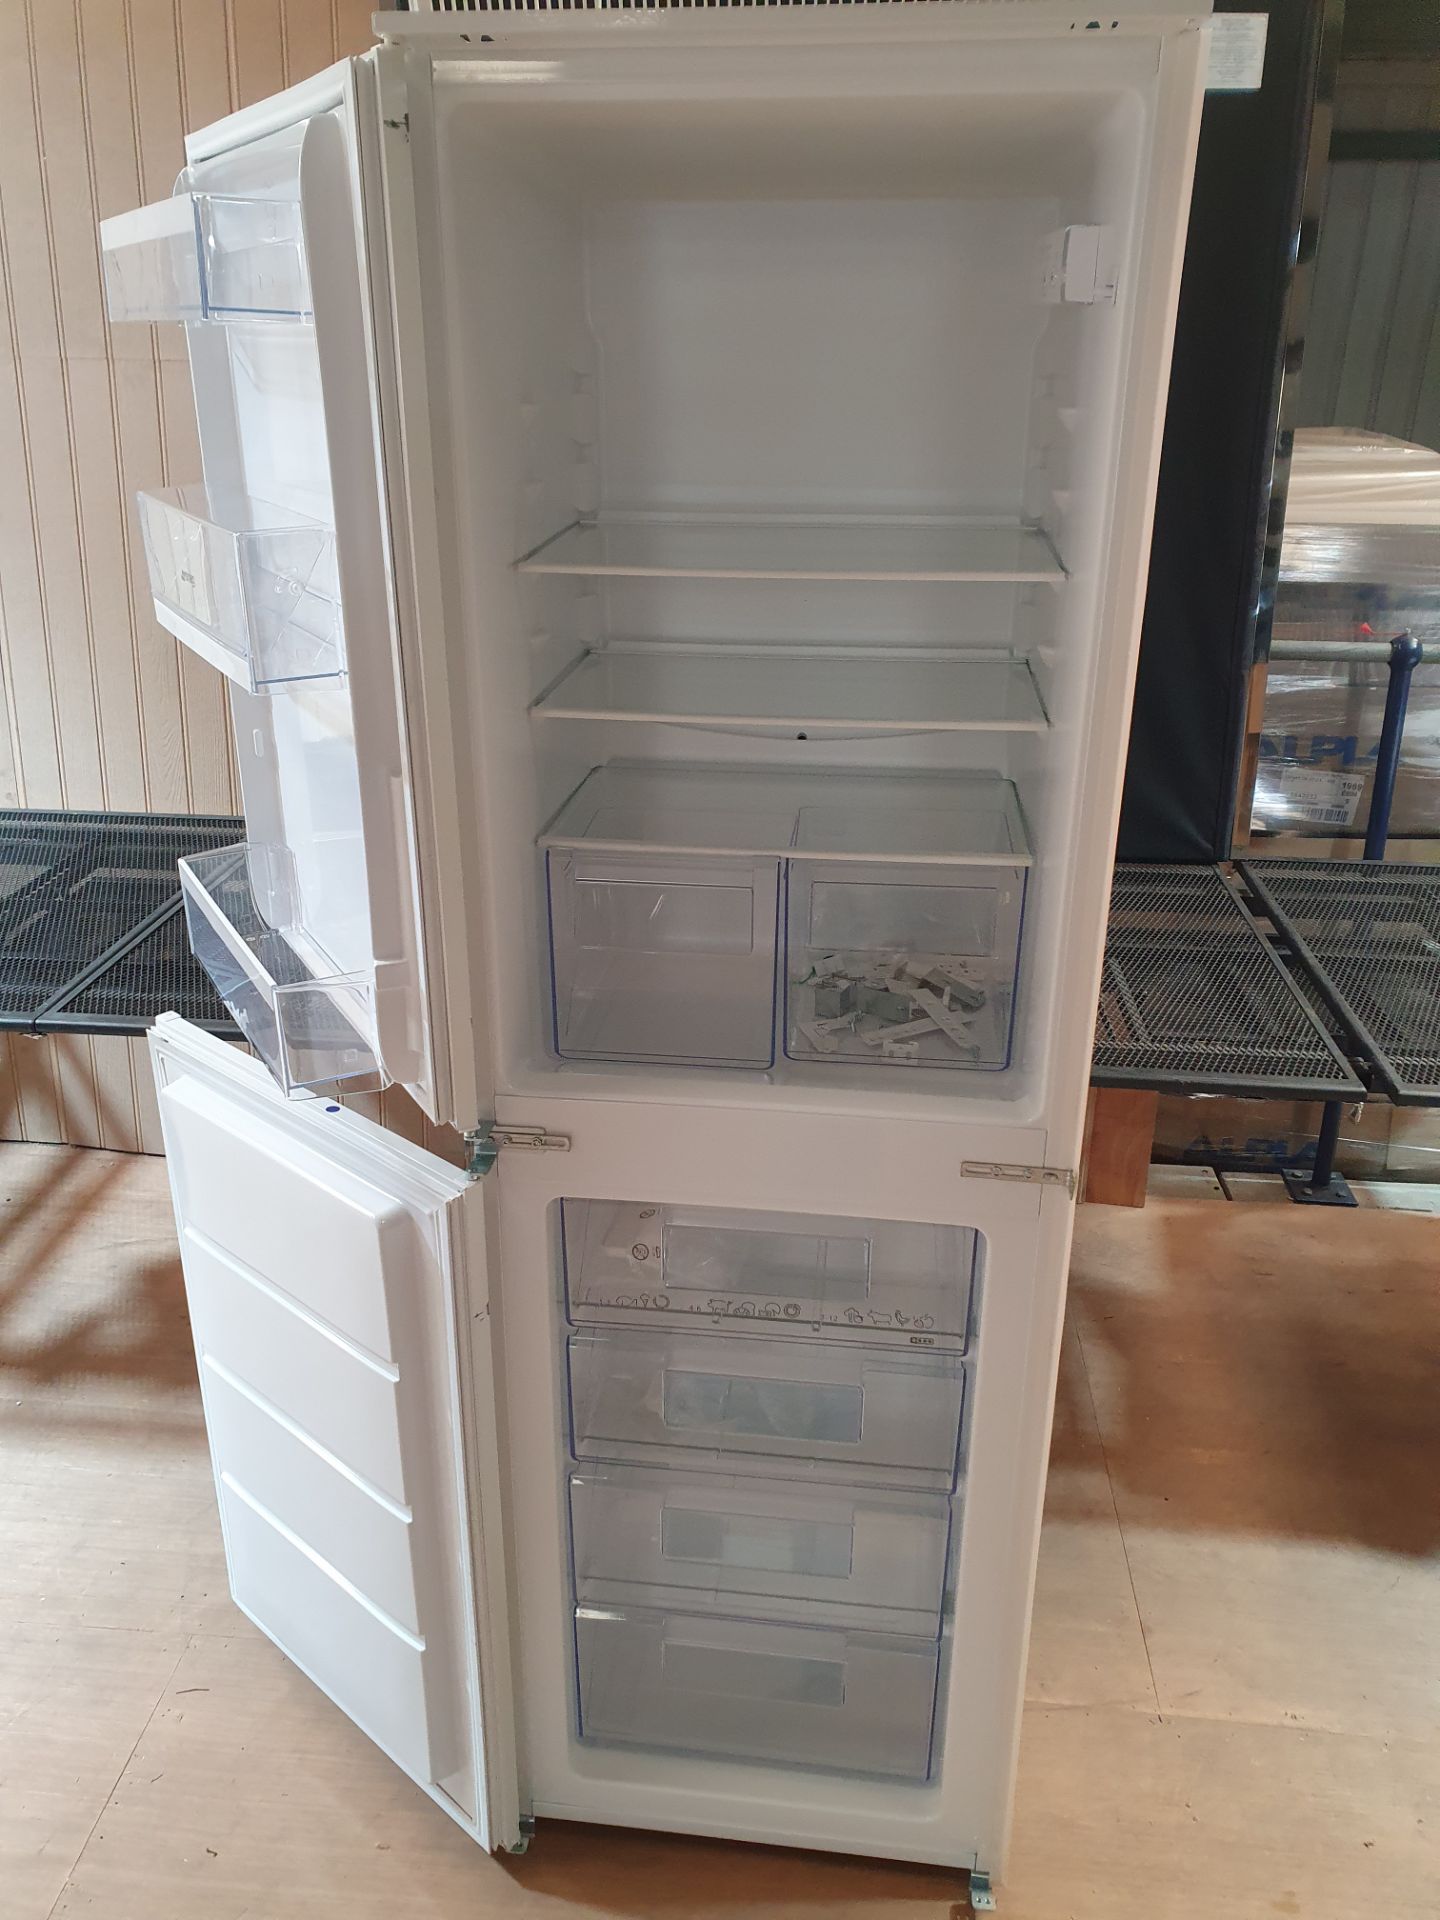 Current Online Price £859. Smeg Universal Built In Right Hinge Refrigerator White UKC4172F - Image 10 of 16